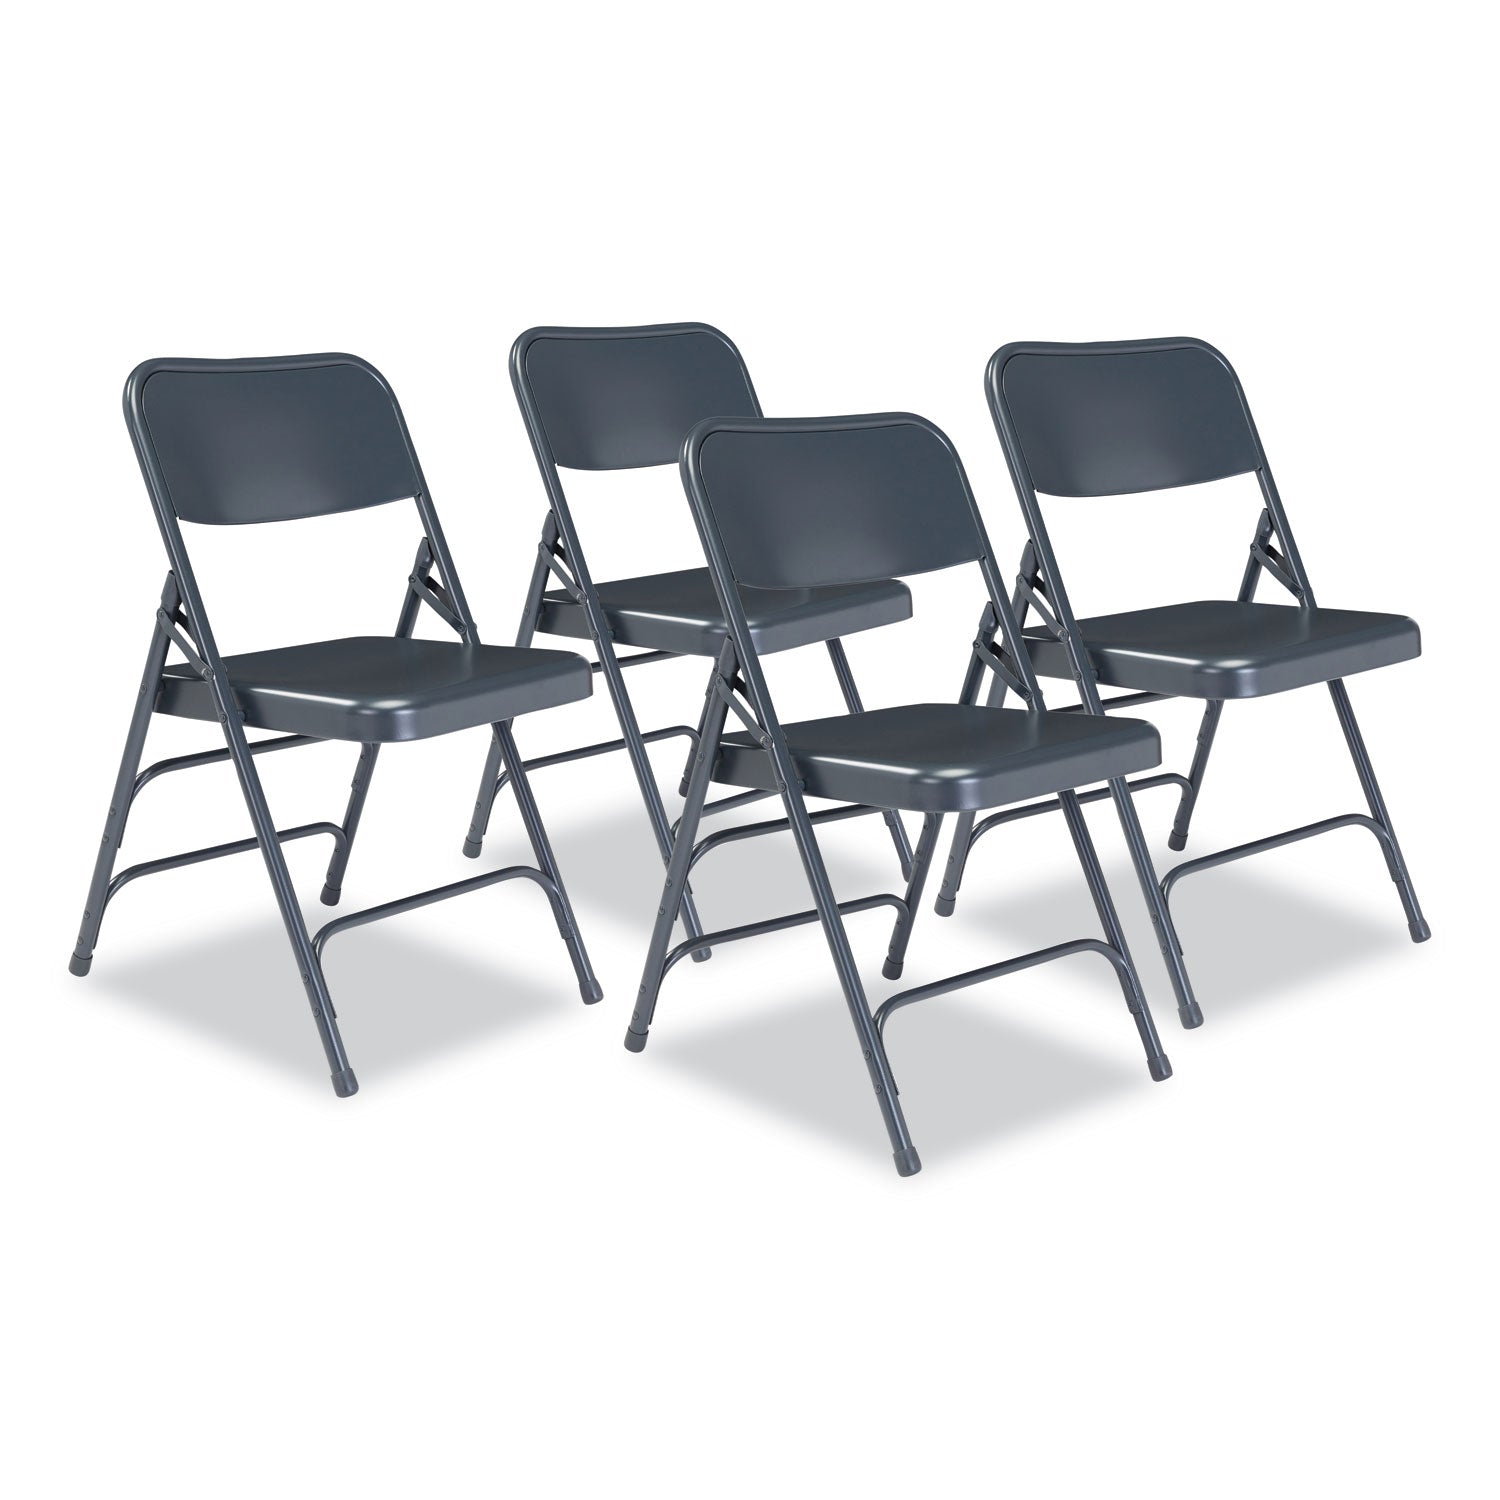 300-series-deluxe-all-steel-triple-brace-folding-chair-supports-480-lb-1725-seat-height-blue-4-ctships-in-1-3-bus-days_nps304 - 1